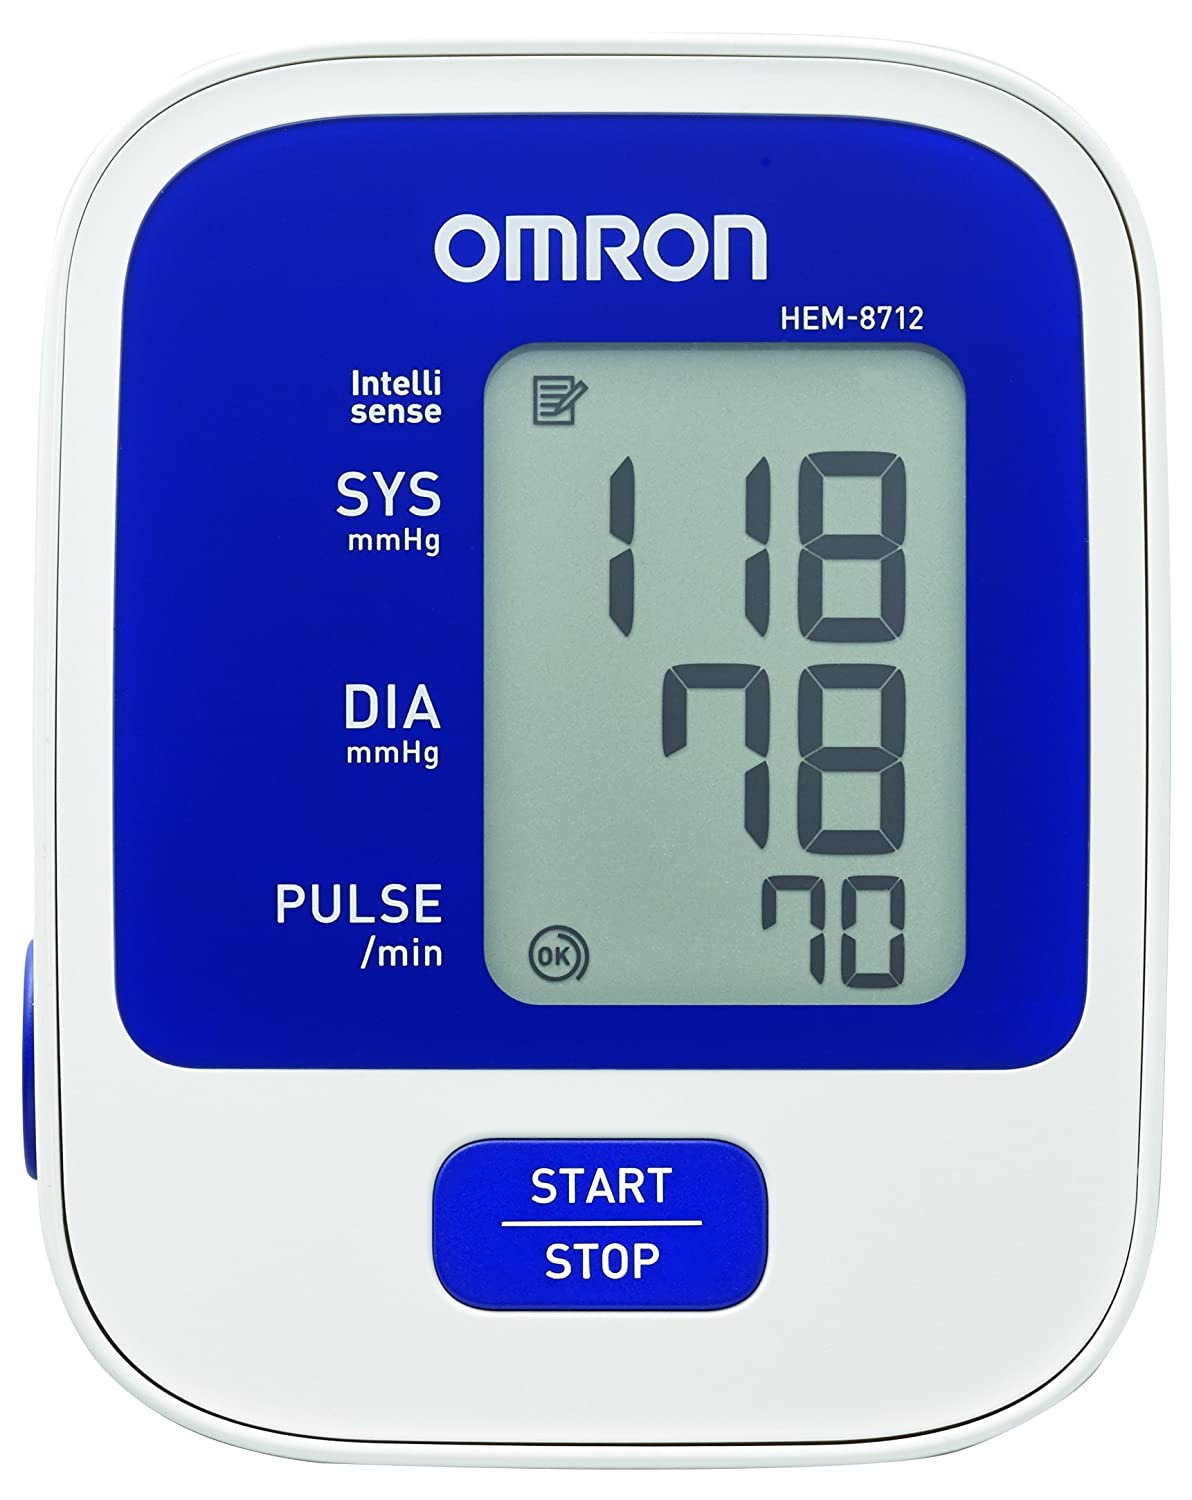 Omron-8712-Automatic-Blood-Pressure-Monitor-White-and-Blue1.jpg